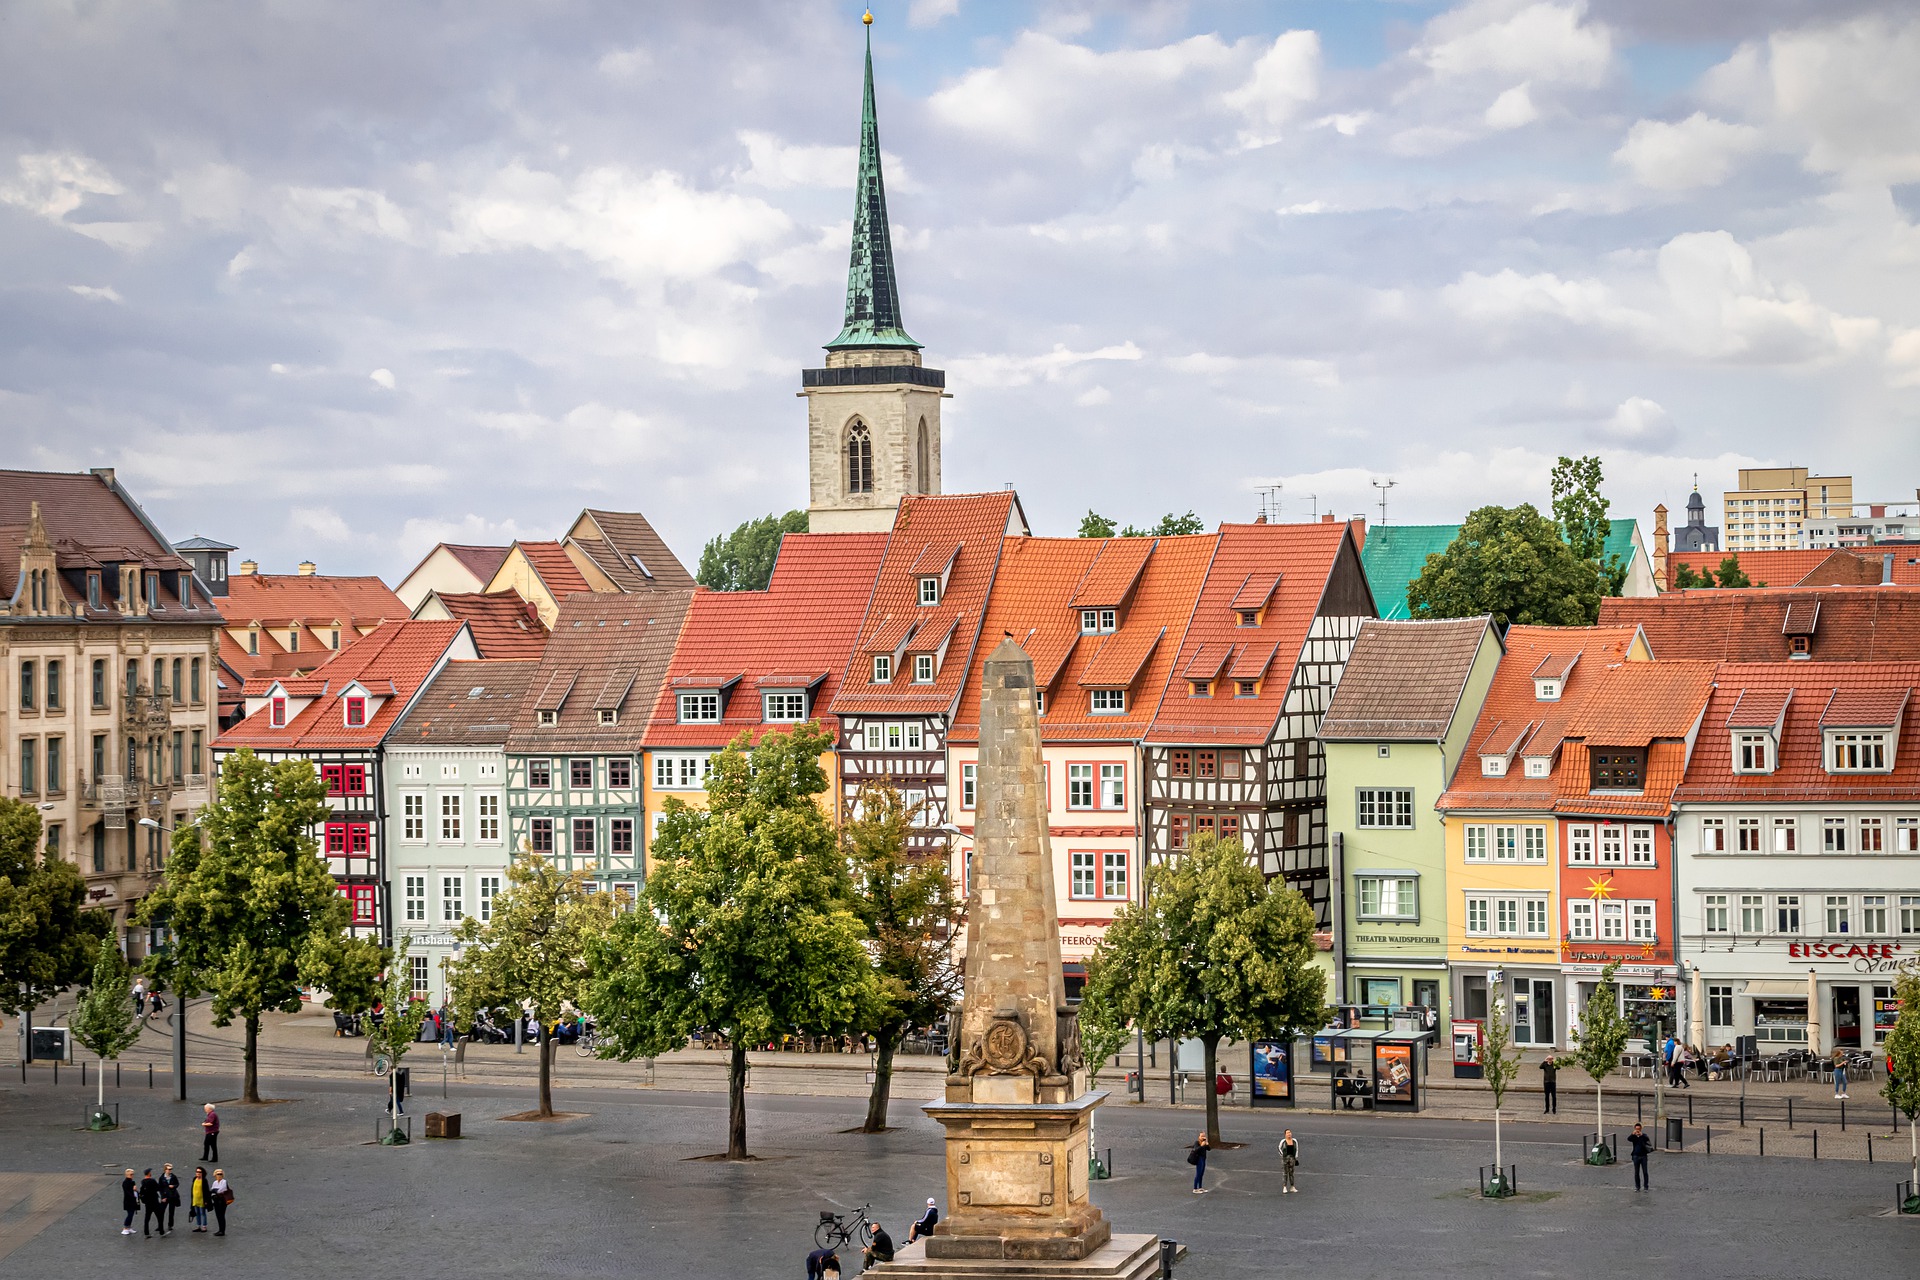 A city square in Germany with traditional red-roofed houses, one of the towns where Martin Luther once lived